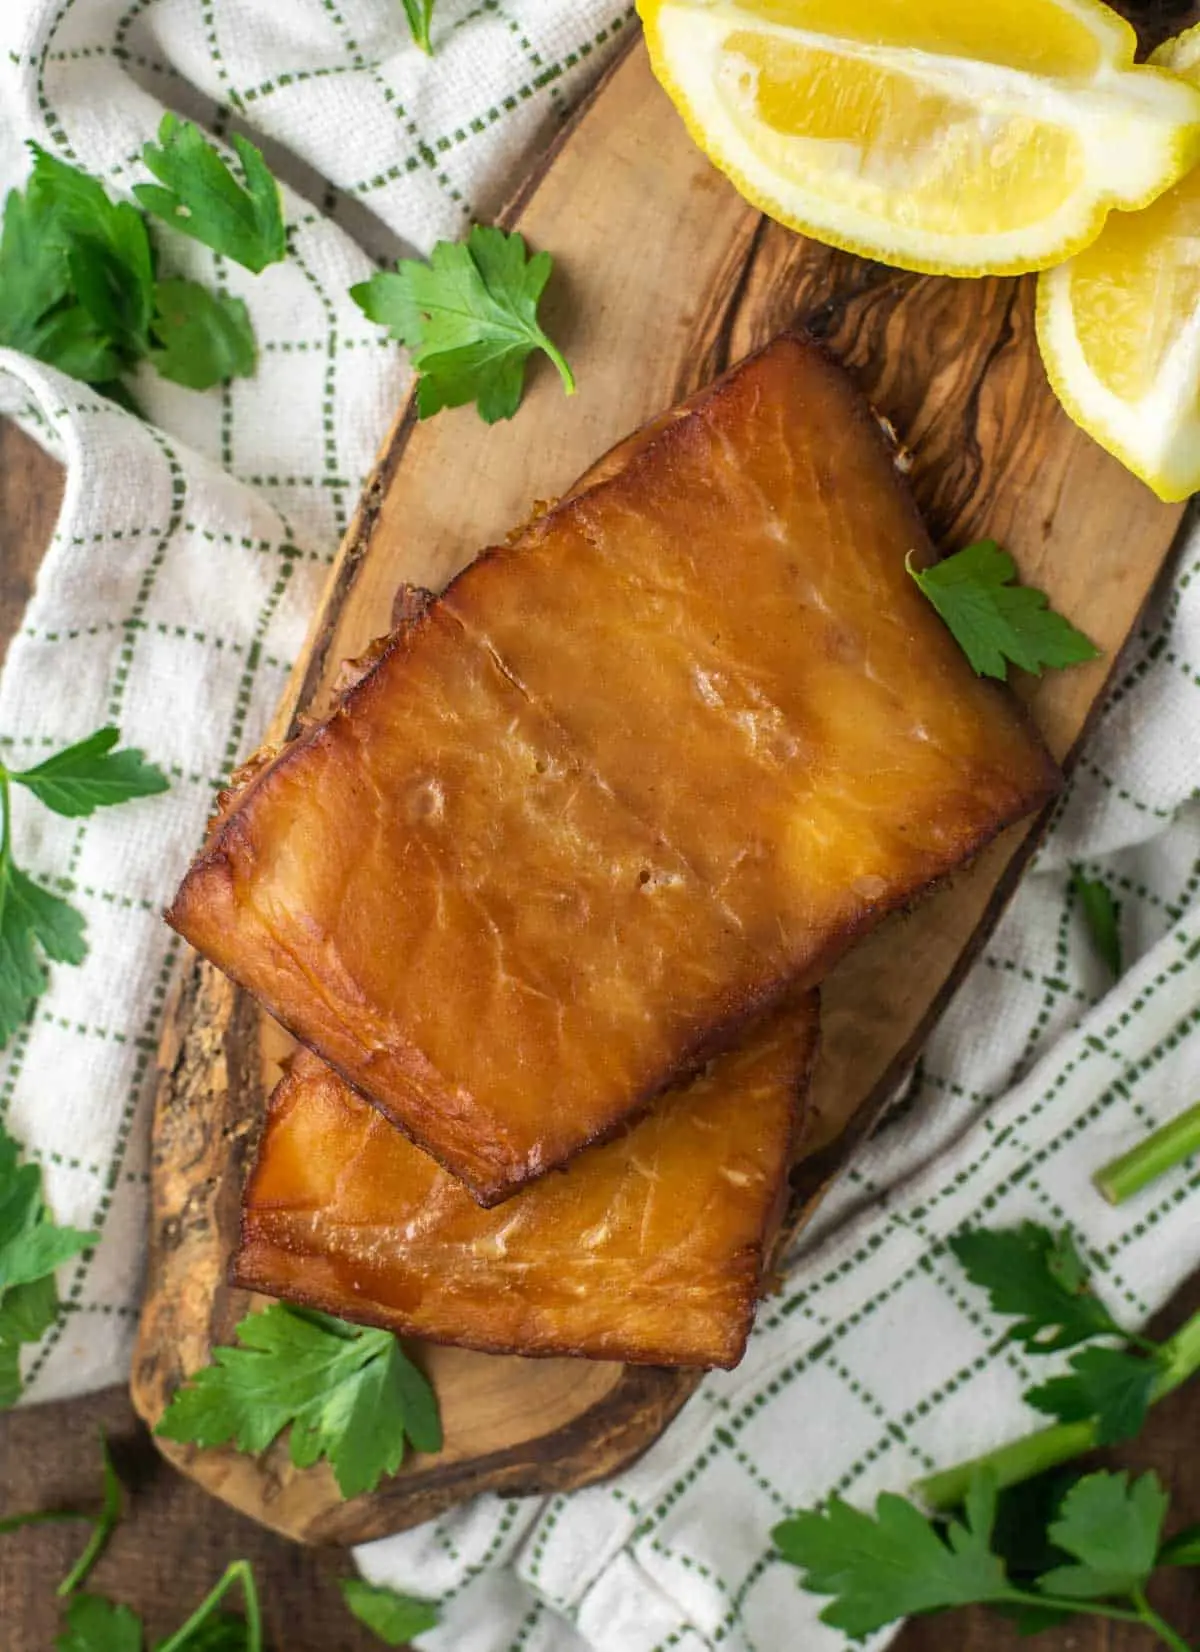 smoked cod - What fish is smoked cod